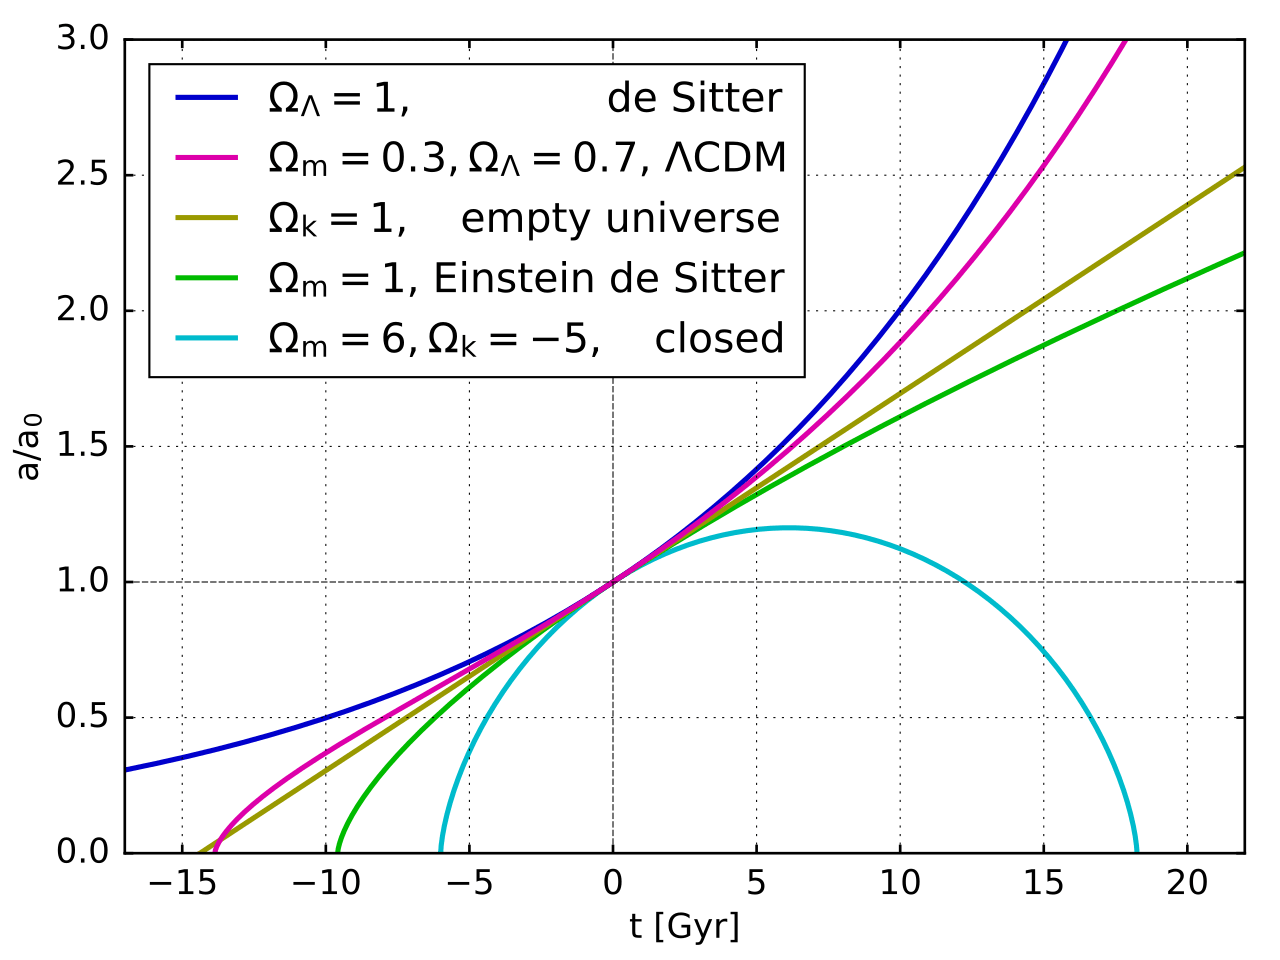 Graph showing the scale factor, a/a0, versus time in Gyr for different cosmological models, including de Sitter, ΛCDM, empty universe, Einstein de Sitter, and a closed universe.